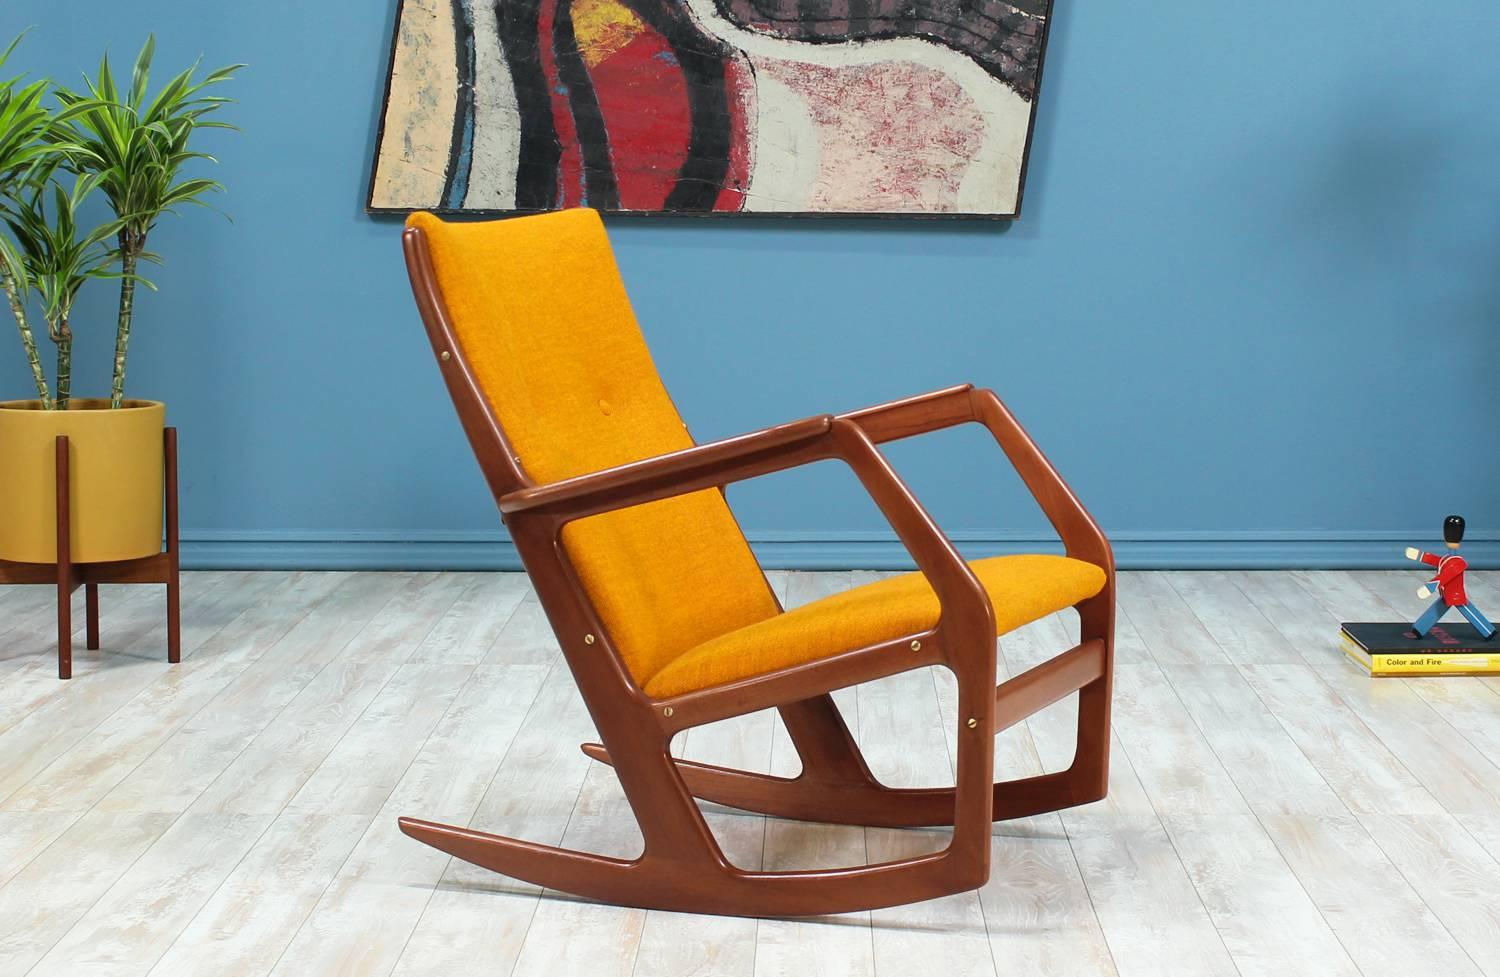 Rocking Chair designed by Georg Jensen for Kubus Møbler in Denmark circa 1960’s. The Model-100 features a teak wood frame with sculpted arms and supported by a front stretcher, with the back and seat upholstered in a vibrant mustard yellow tweed